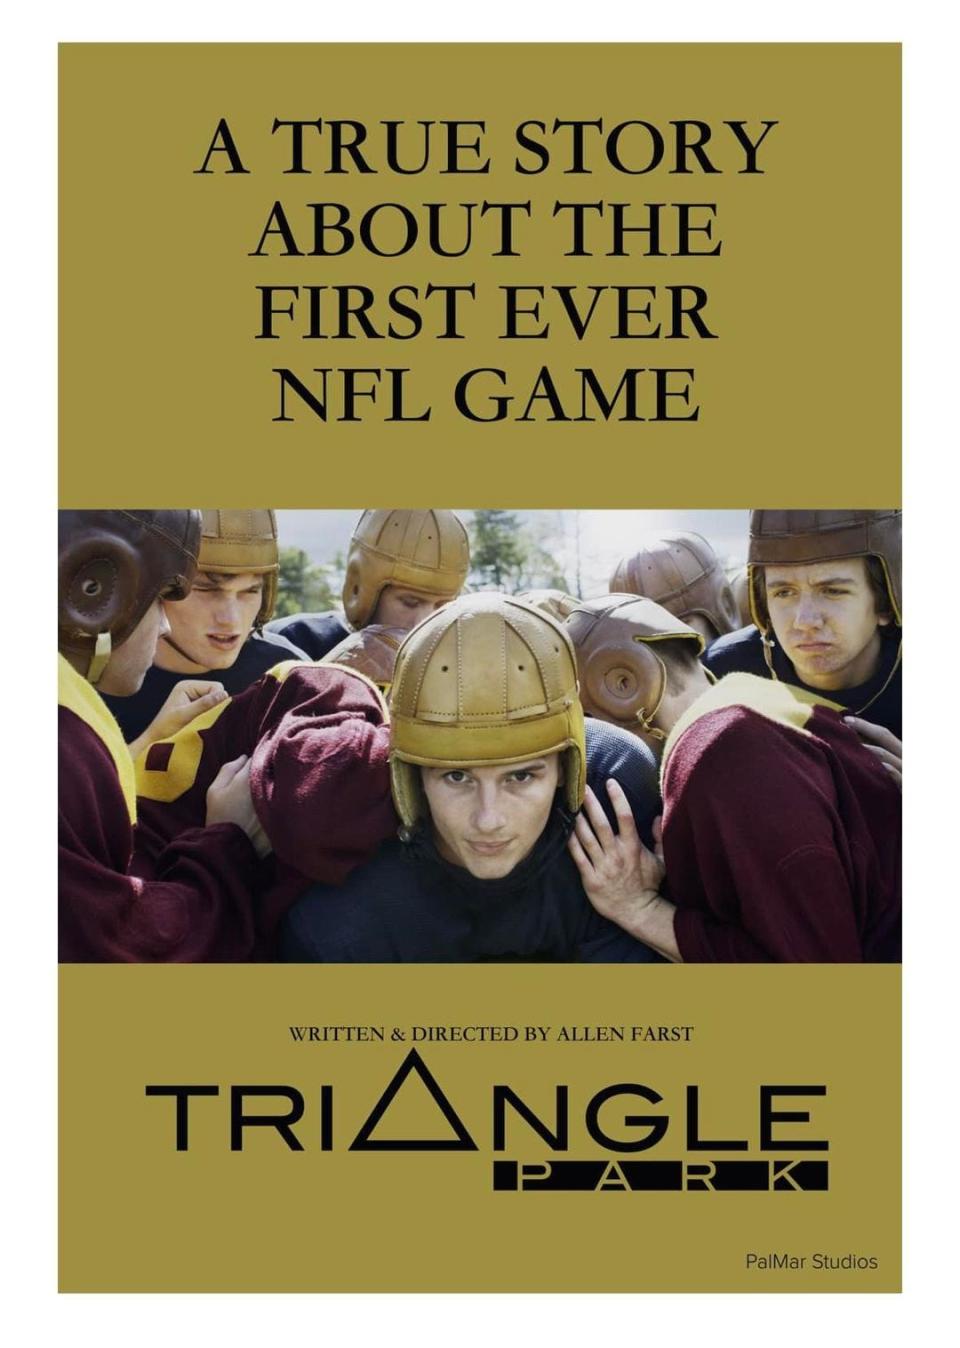 "Triangle Park," which will be shown Nov. 15 at the Canton Palace Theatre, was written and directed by Dayton filmmaker Allen Farst. It tells the story of the first professional football game in Dayton's Triangle Park, a contest that kicked off competition in the league formed in Canton that became the National Football League.